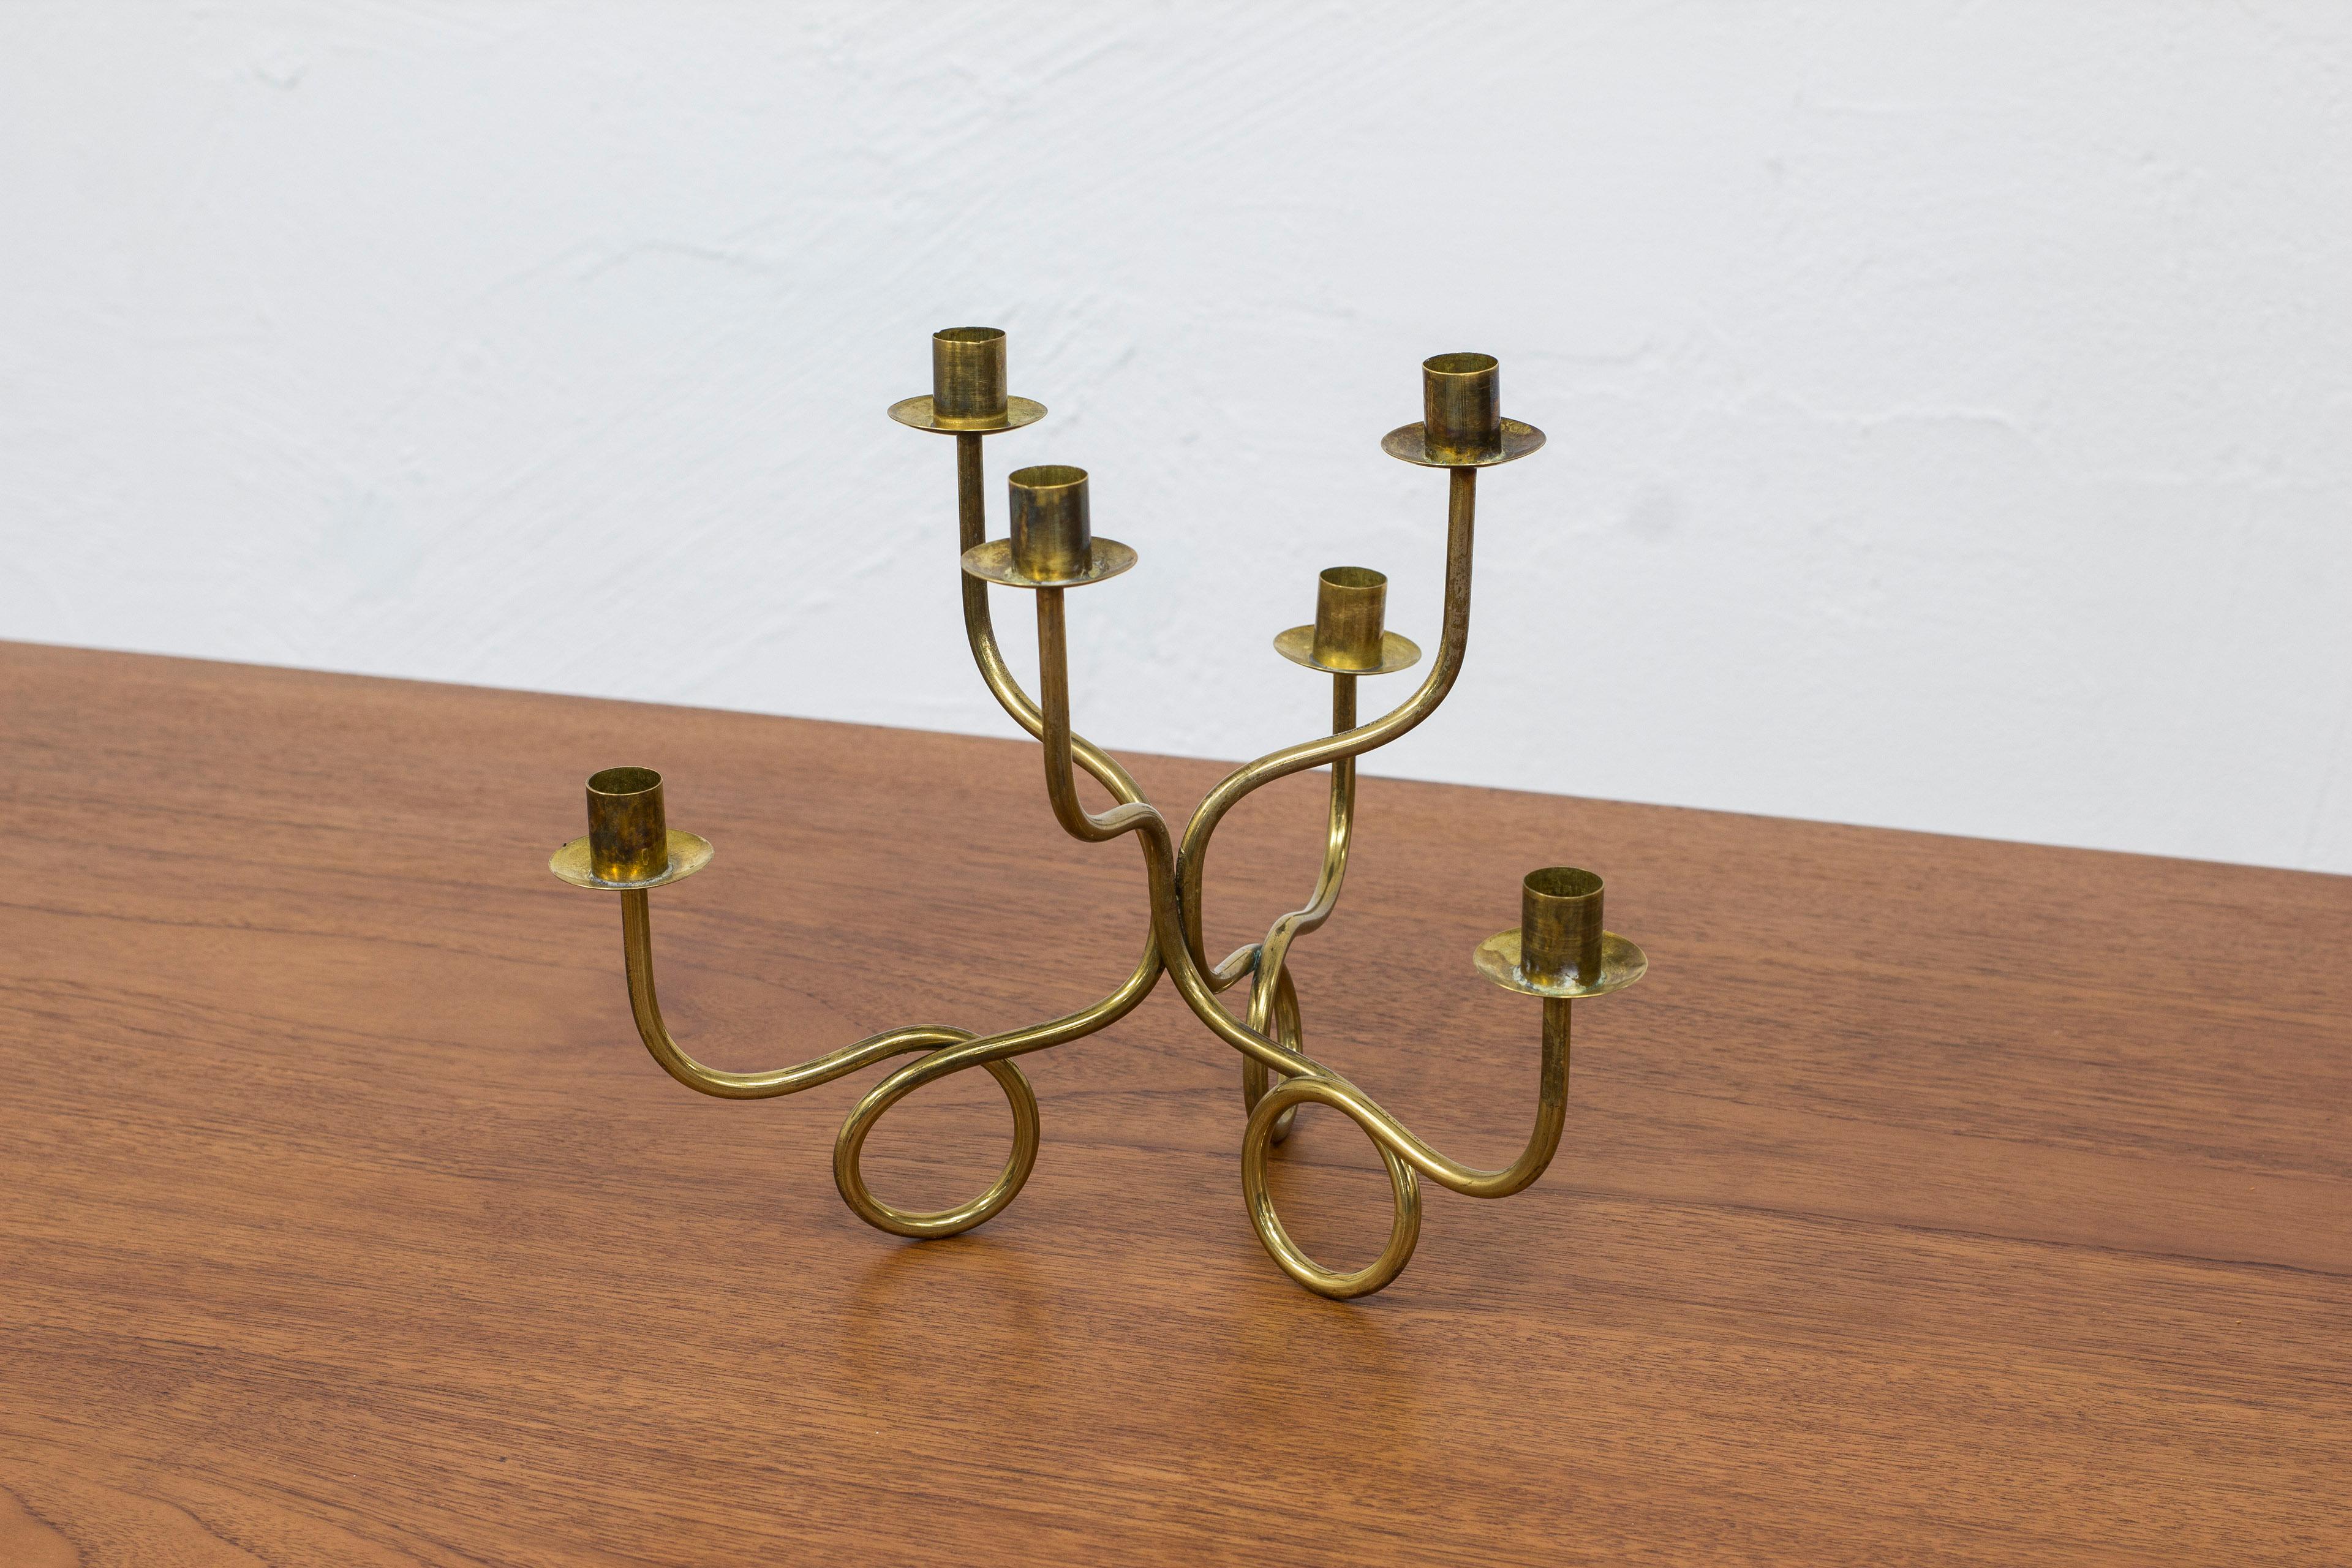 Candelabra designed by Josef Frank. Manufactured by Svenskt Tenn in Sweden. This example ca 1940-50s. Made from solid brass with six candle holders. Very good vintage condition with few signs of age related wear and patina, mainly oxidation to the